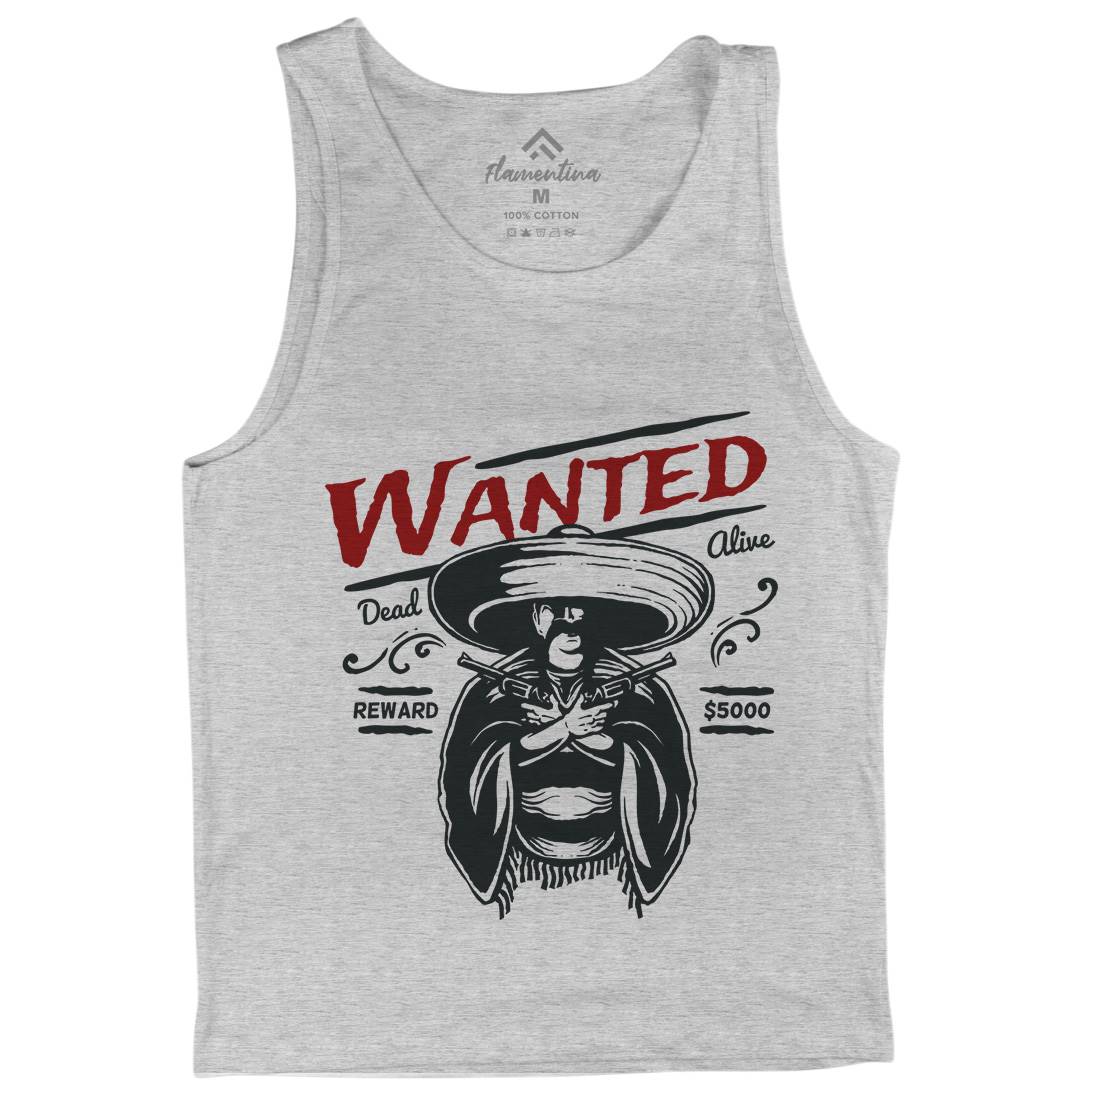 Wanted Mens Tank Top Vest American A391